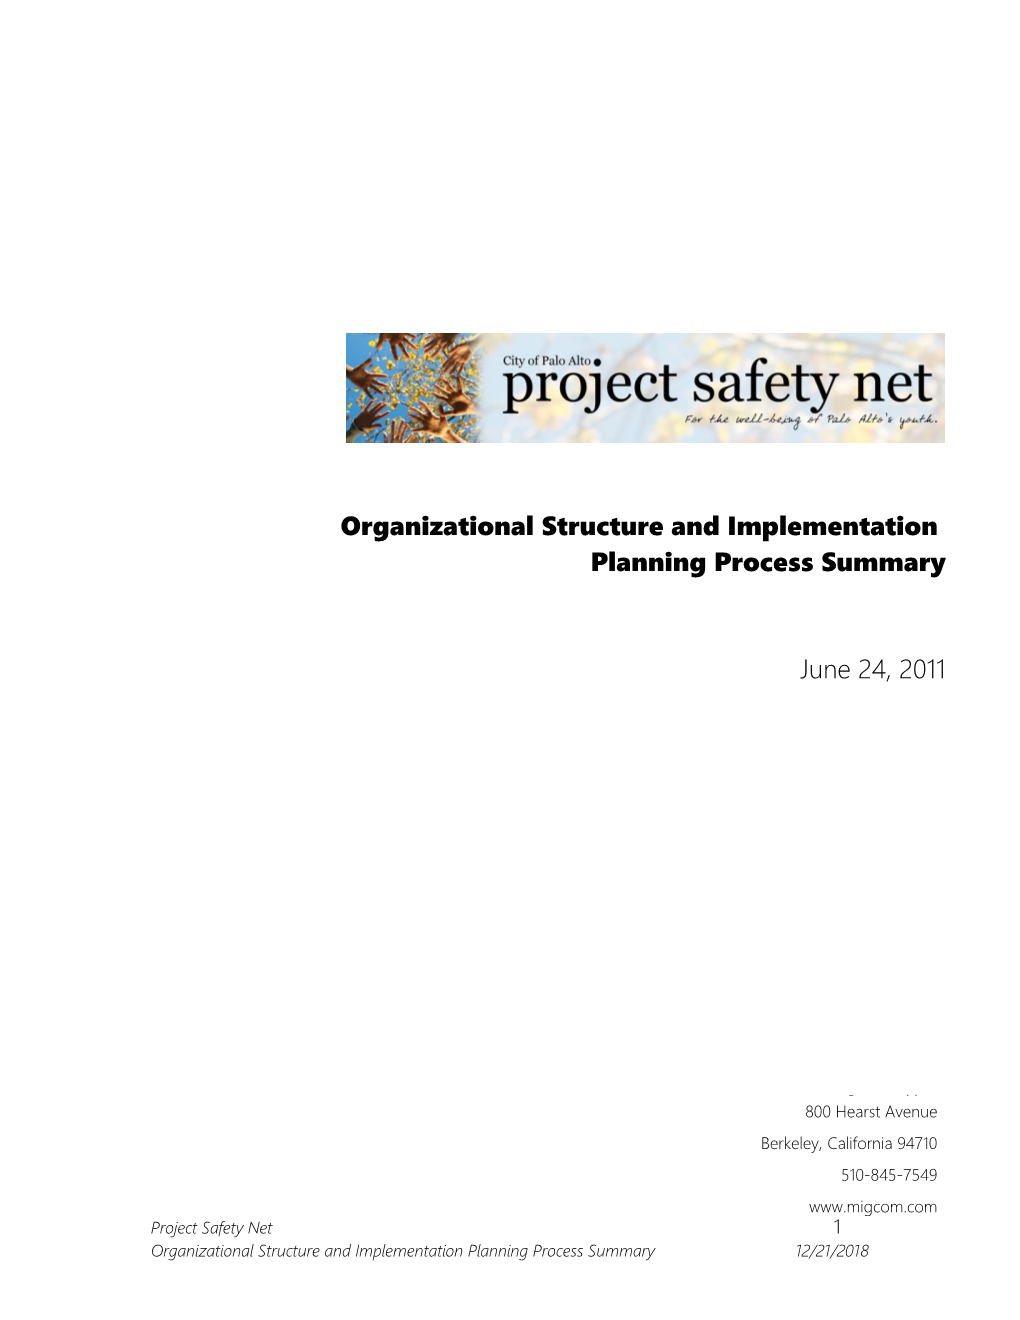 Project Safety Net Draft Blueprint Outline